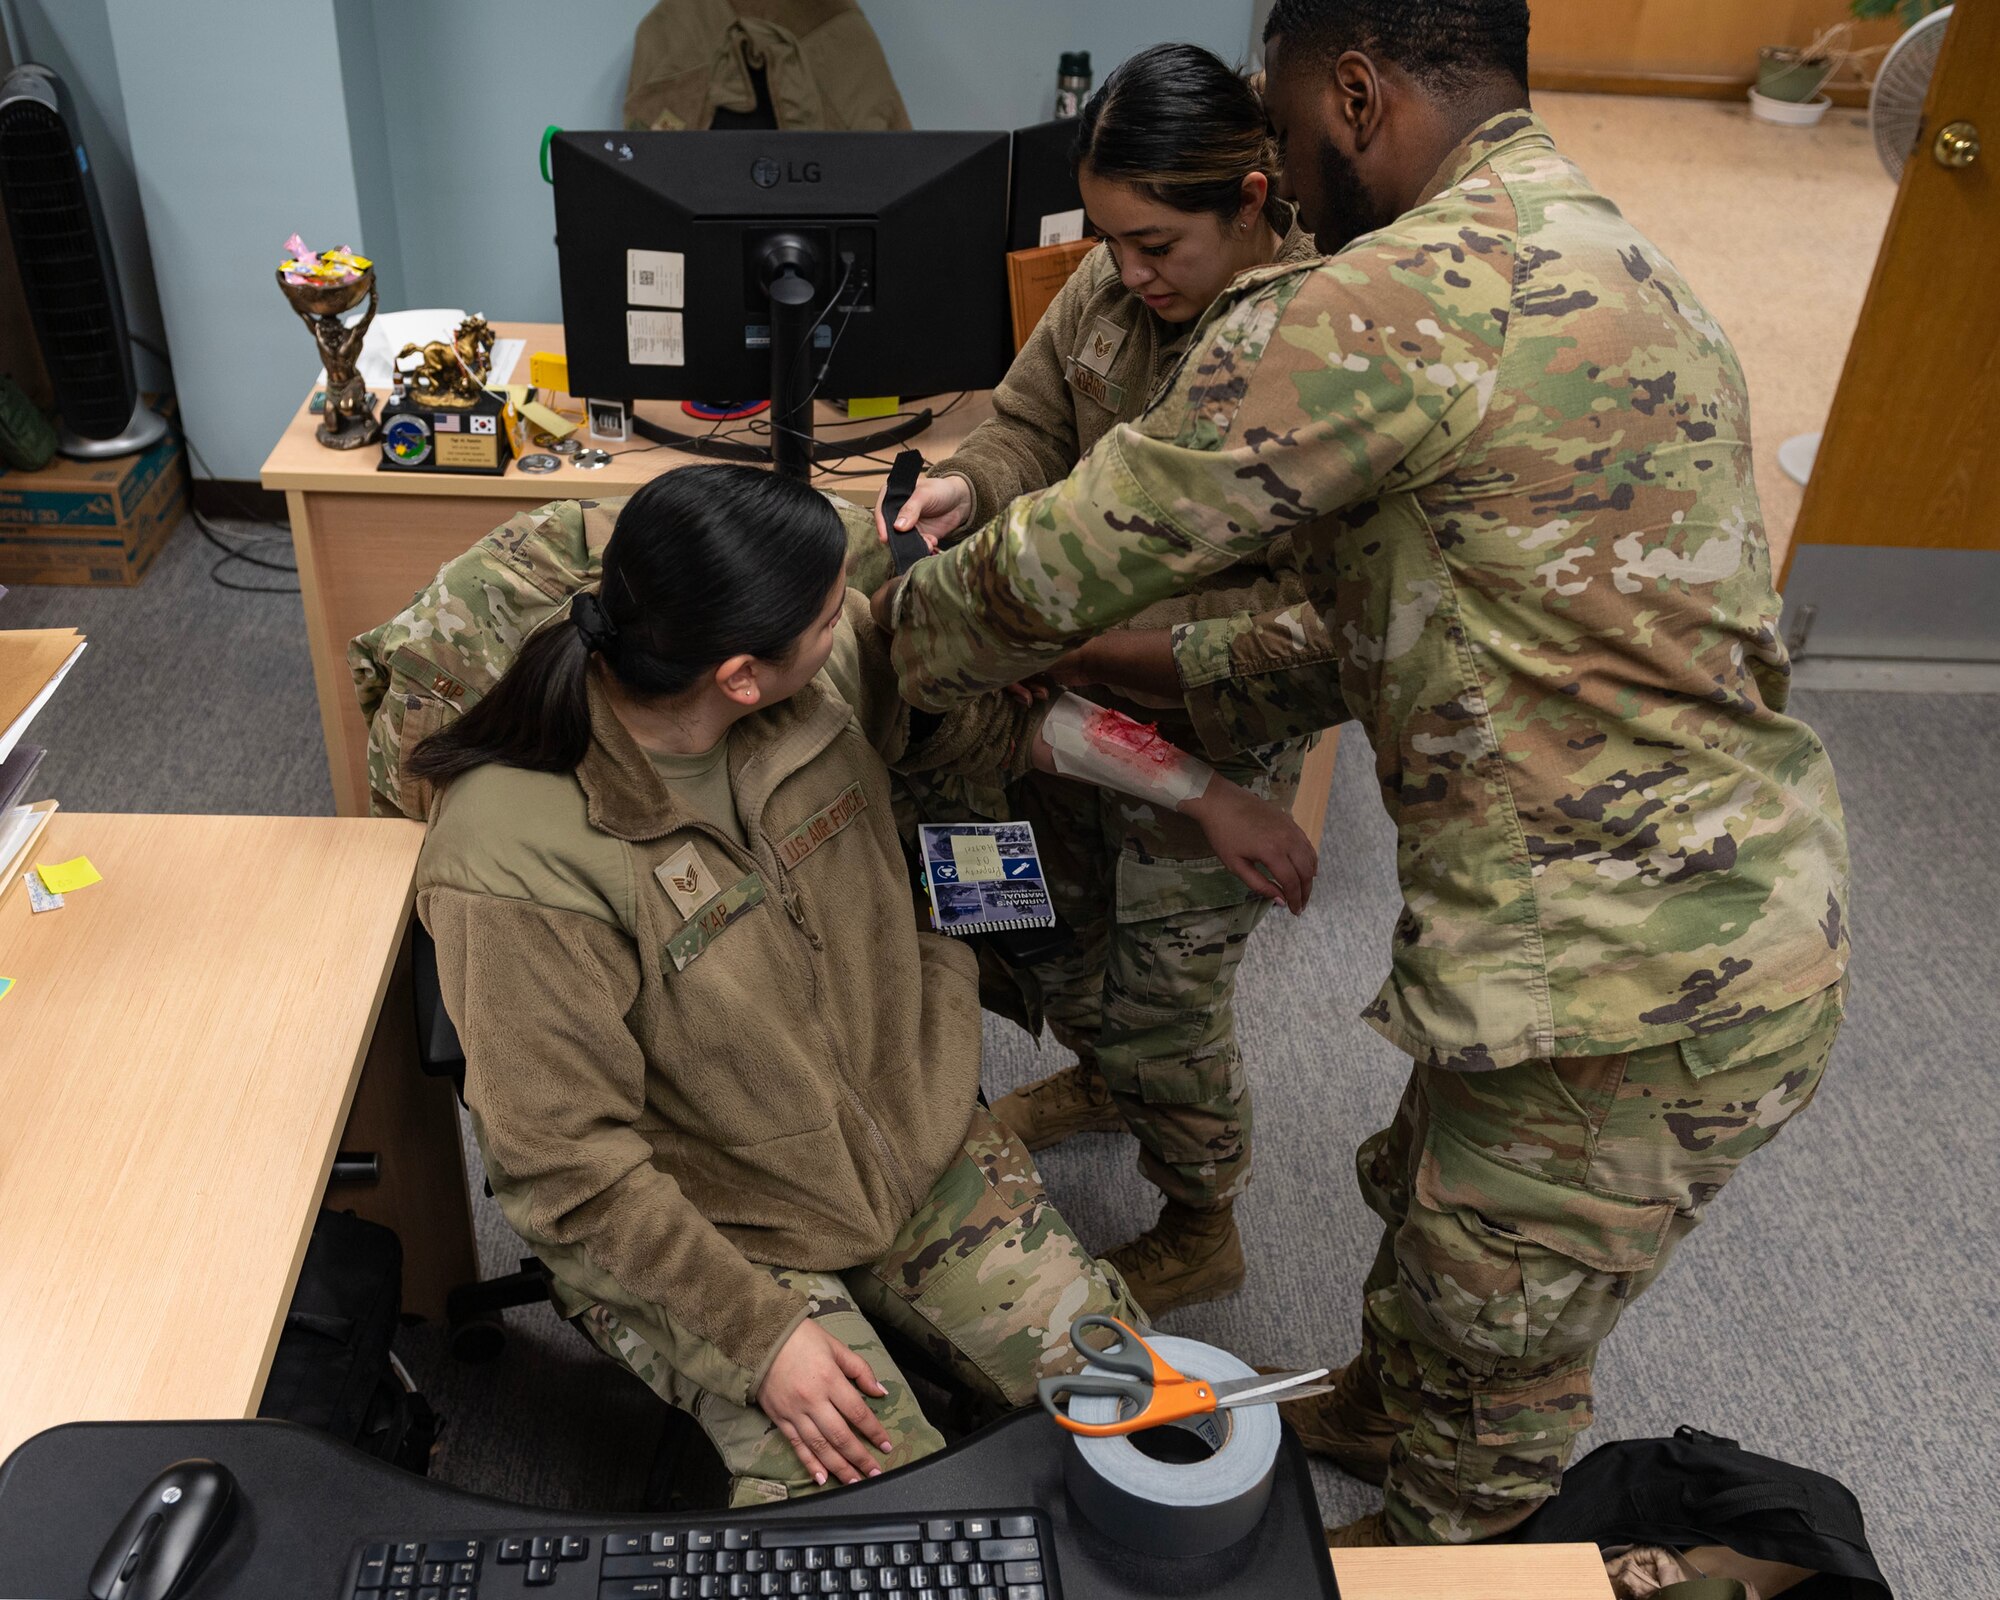 U.S. Air Force Senior Airman Maaliq Williams, 51st Comptroller Squadron finance customer service technician, left, and Staff Sgt. Riciel Sobreo, 51st CPTS resource advisor, conducts tactical combat casualty care on Staff Sgt. Angelica Yap, 51st CPTS financial operations supervisor, during Beverly Midnight 24-1 at Osan Air Base, Republic of Korea, Jan. 29, 2024. TCCC is the new standard across the Department of Defense for first response care. Since June 2022, the TCCC program has completely replaced Self-Aid Buddy Care, also known as SABC. (U.S. Air Force photo by Staff Sgt. Aubree Owens)